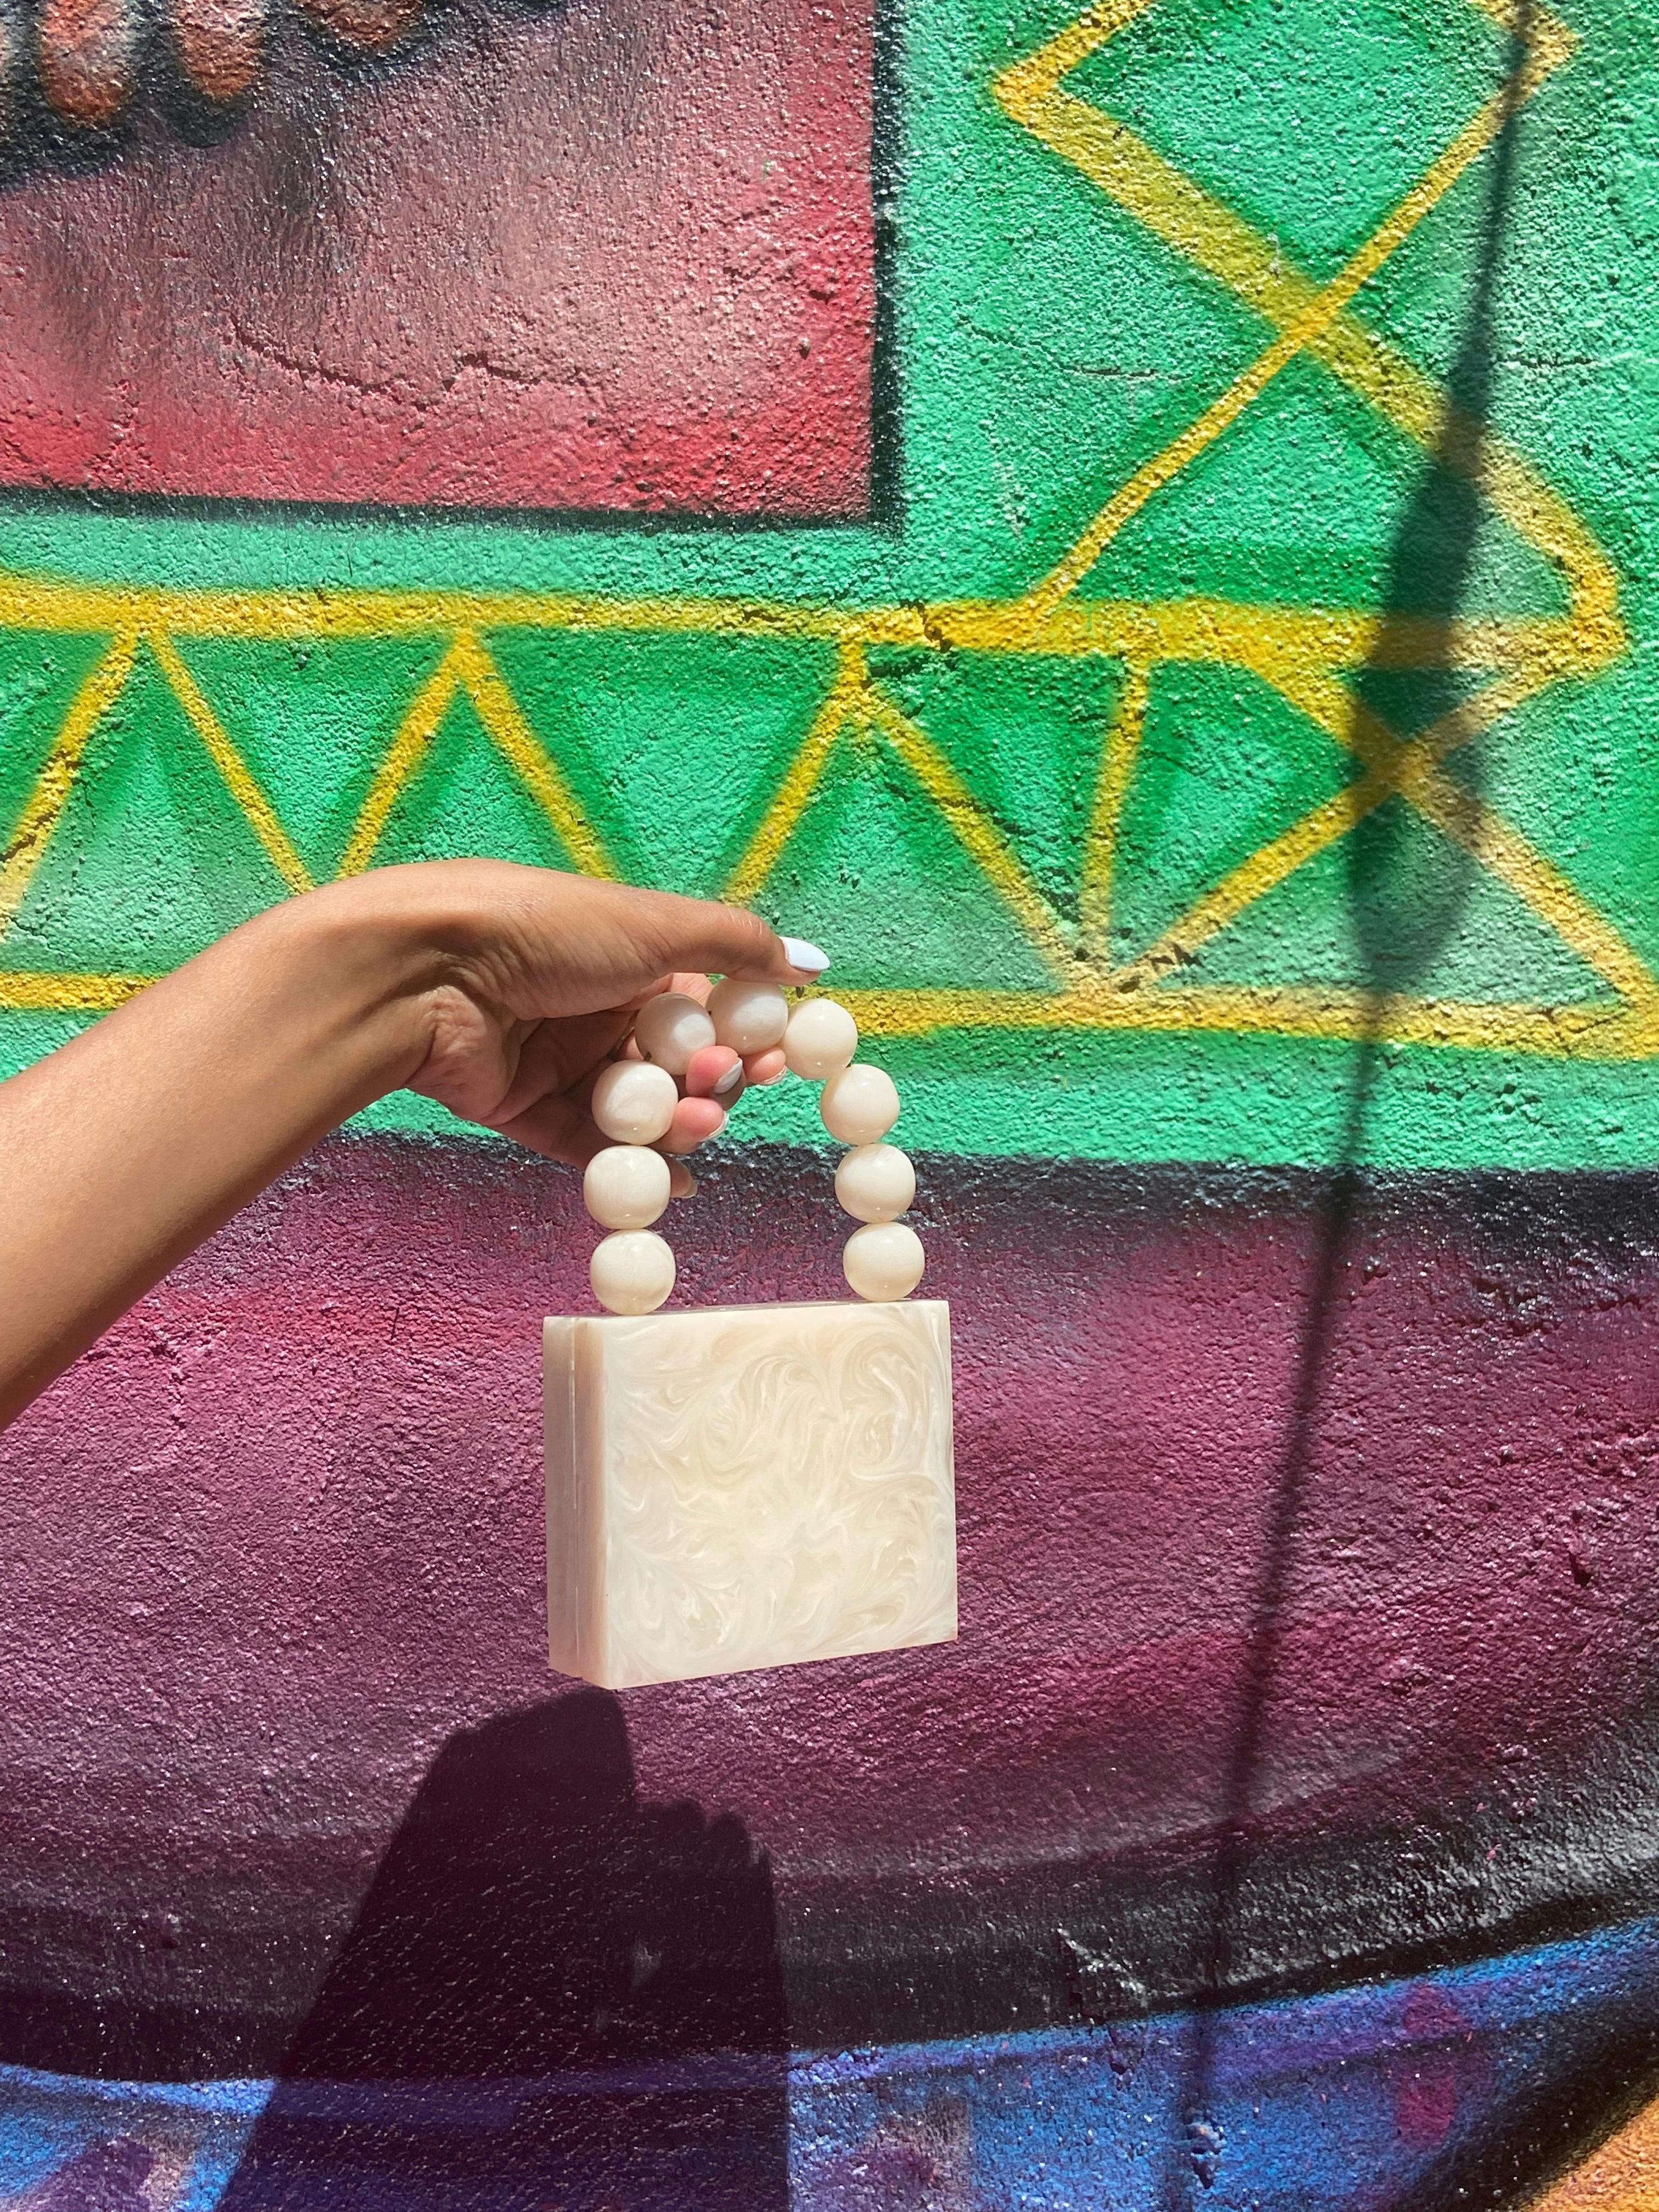 The Mini Pearl Bag, a product by Clutcheeet